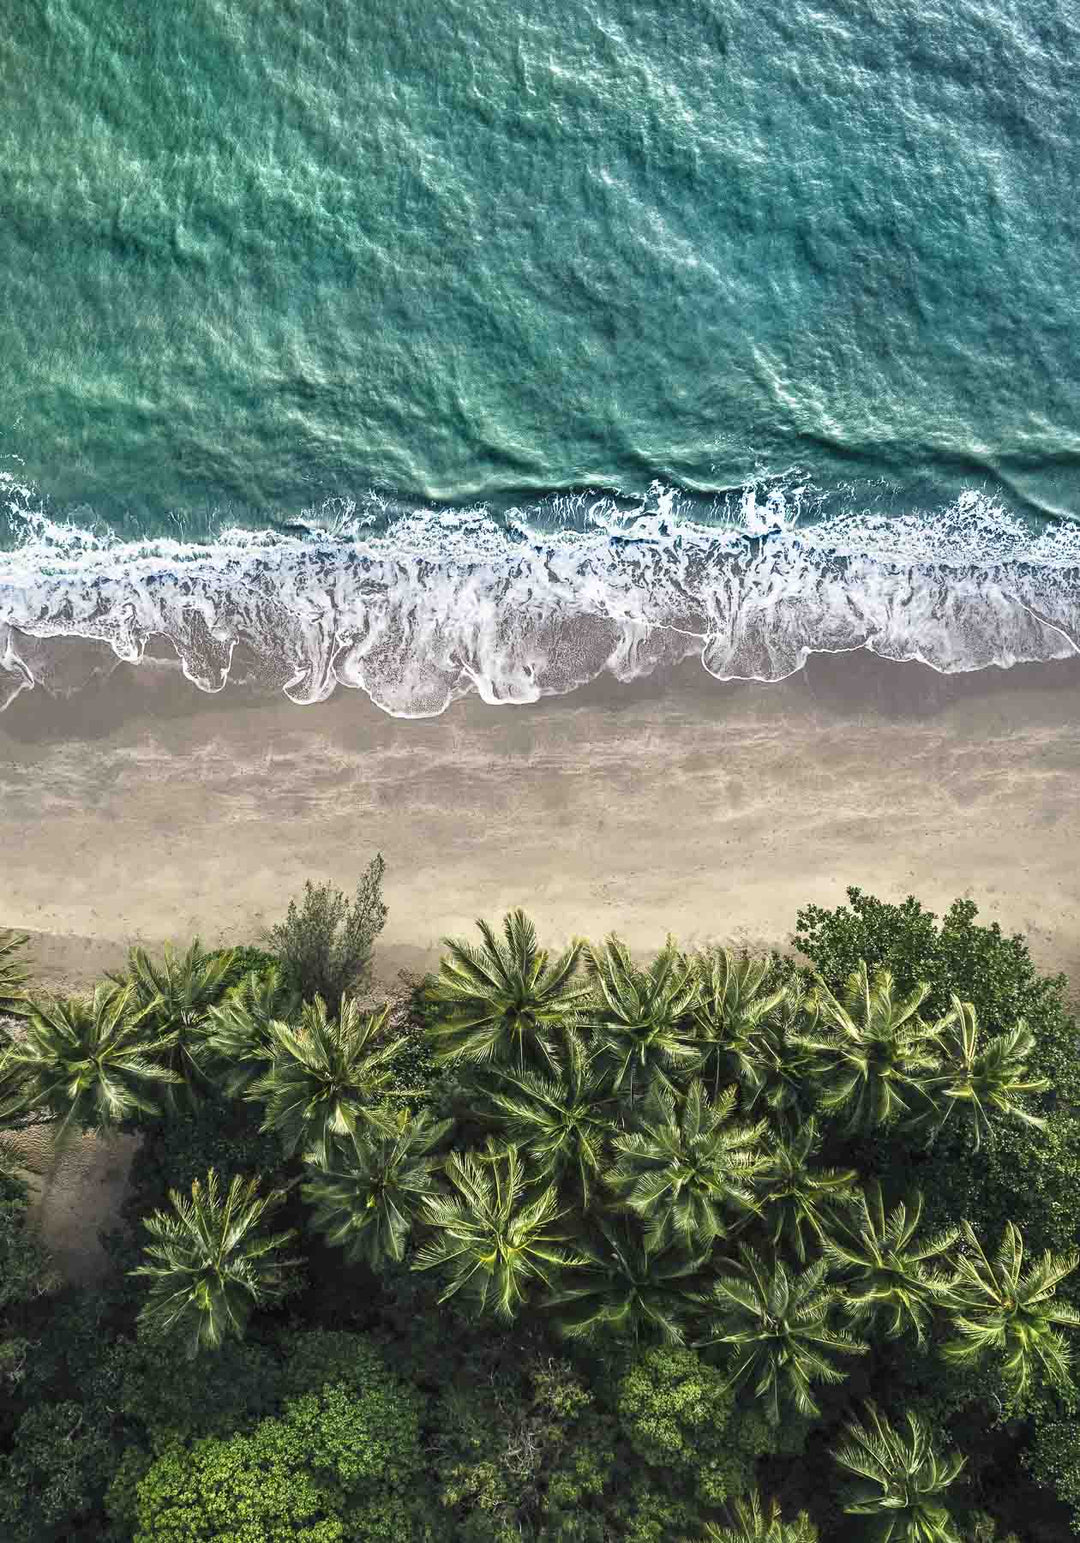 four mile beach aerial sunrise photograph over palm trees with waves